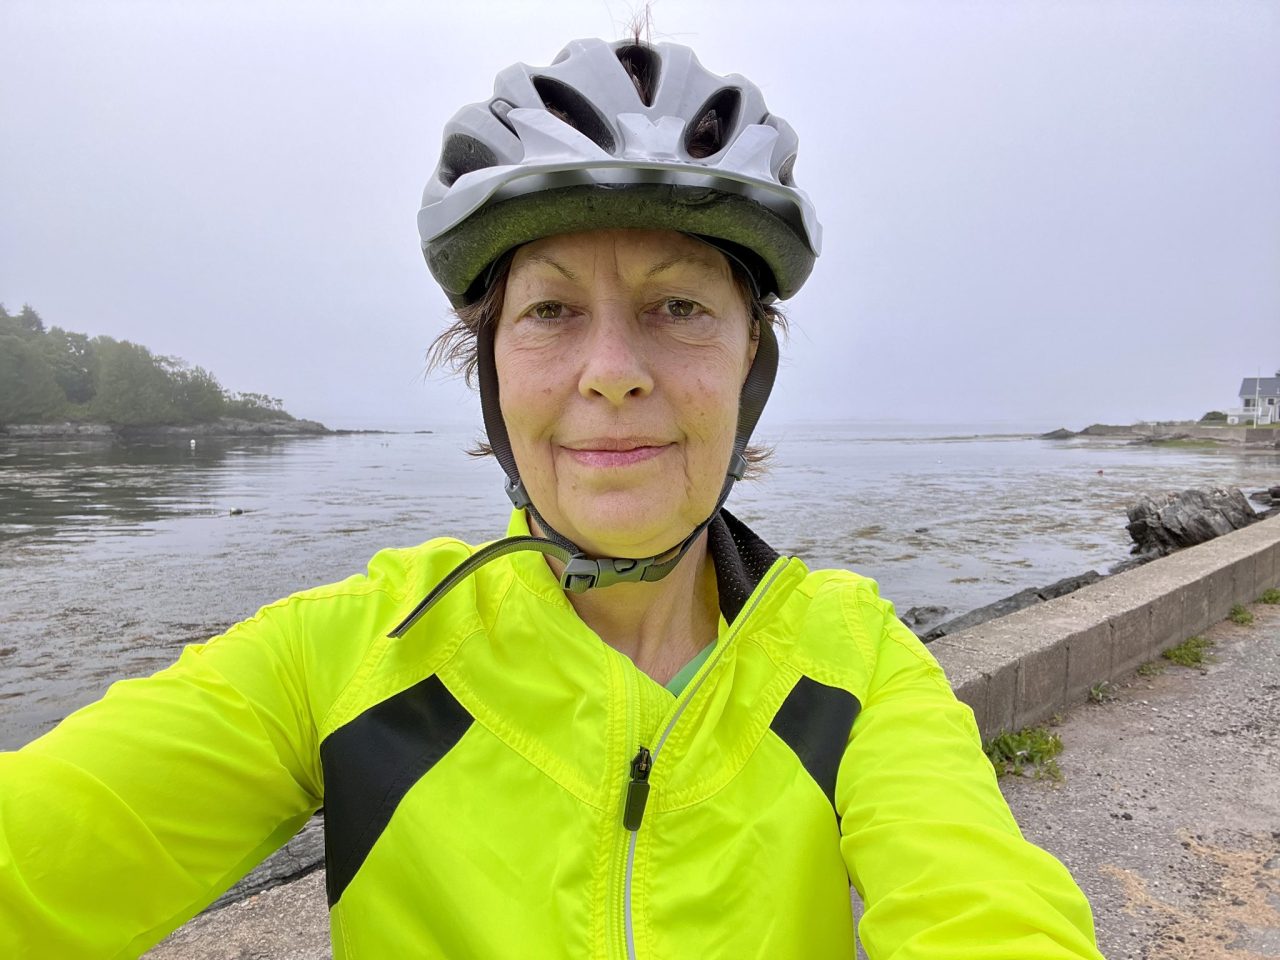 Biked today to get in shape for breakthrough challenge to raise $ for cancer research – Lynn Schuchter